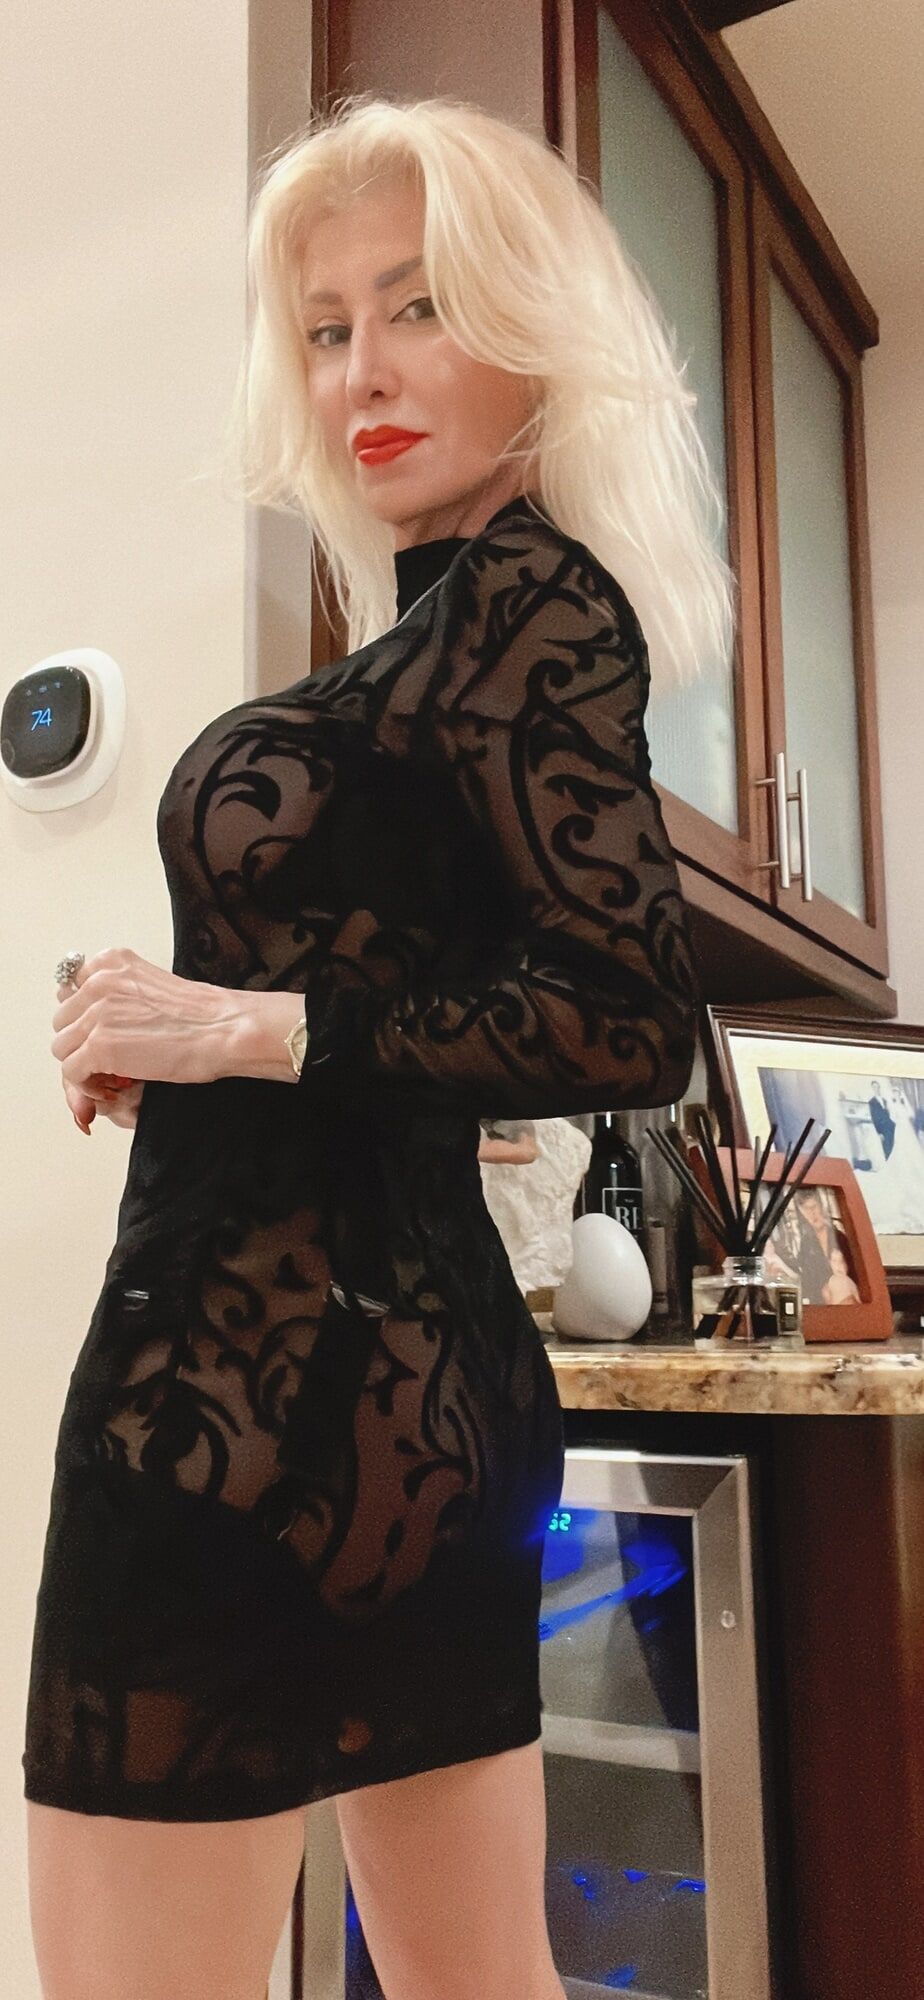 Going out in a sheer dress again  #7